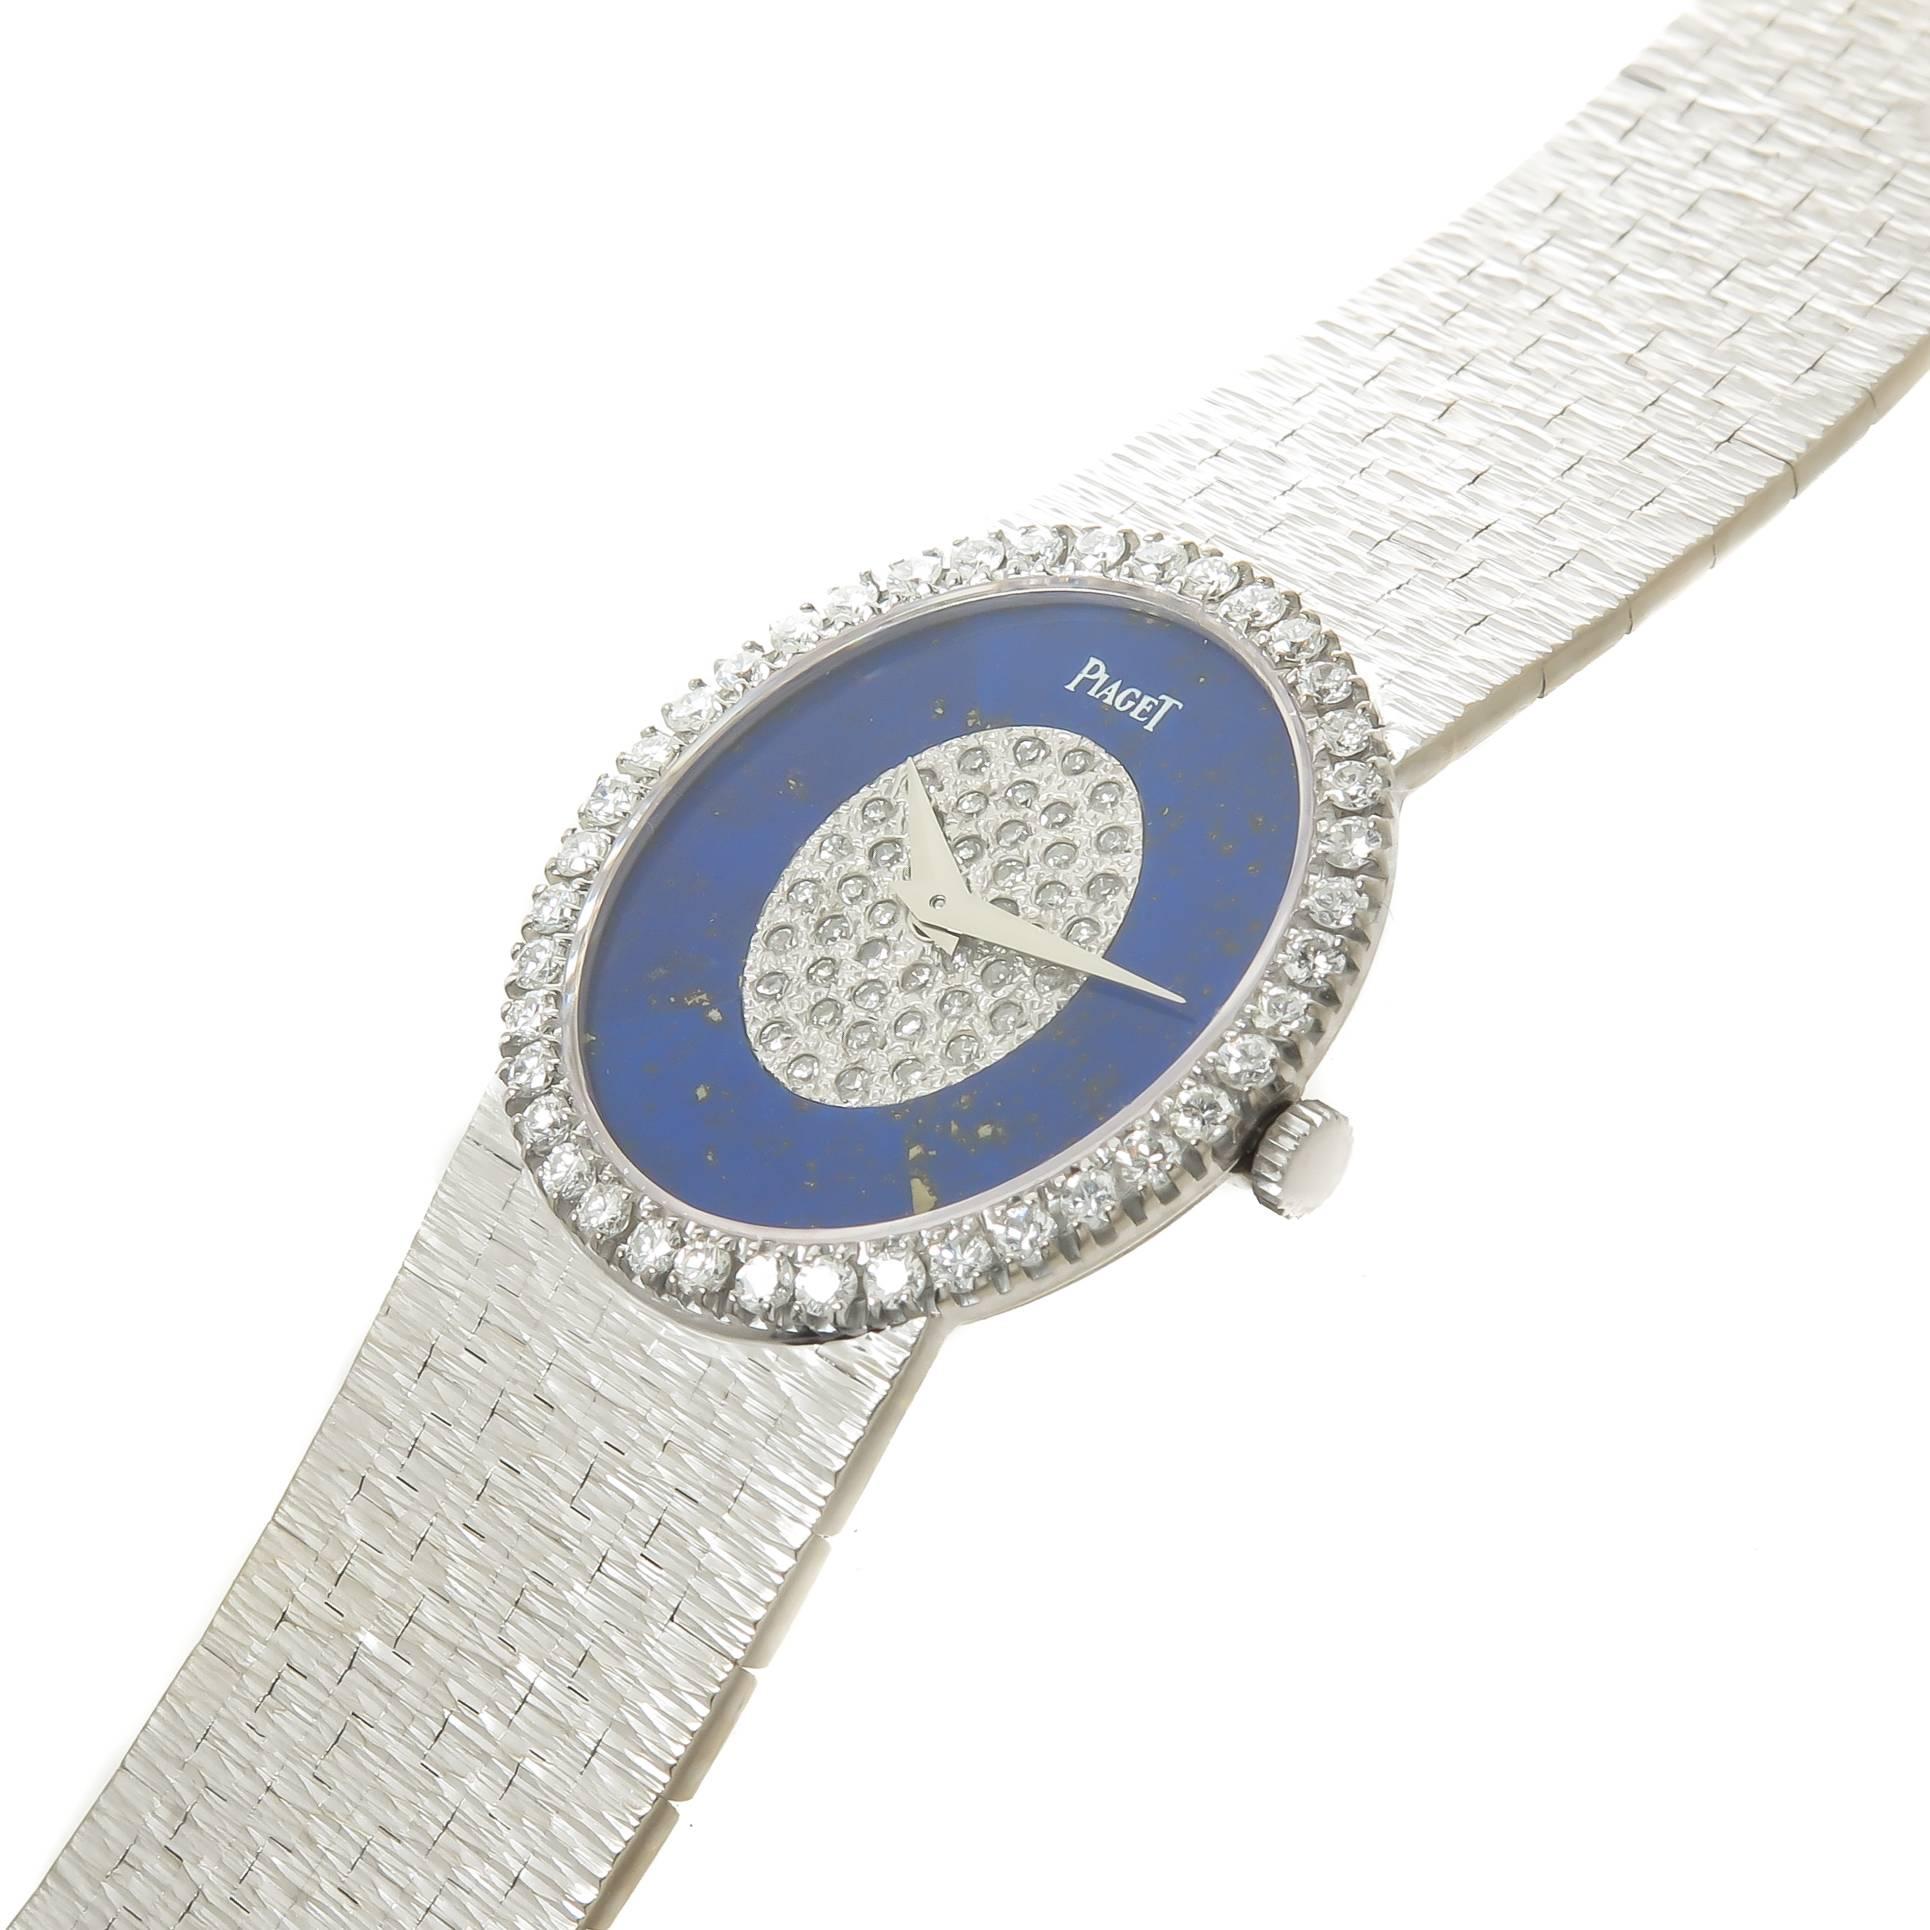 Circa 1970 Piaget Ladies wrist watch, 27 X 24 MM 18K White Gold Oval case with a Factory original Diamond set bezel of Fine White Round Brilliant cuts totaling 1 Carat. 17 Jewel mechanical, manual wind Movement, Lapis Lazuli Dial with a Center of